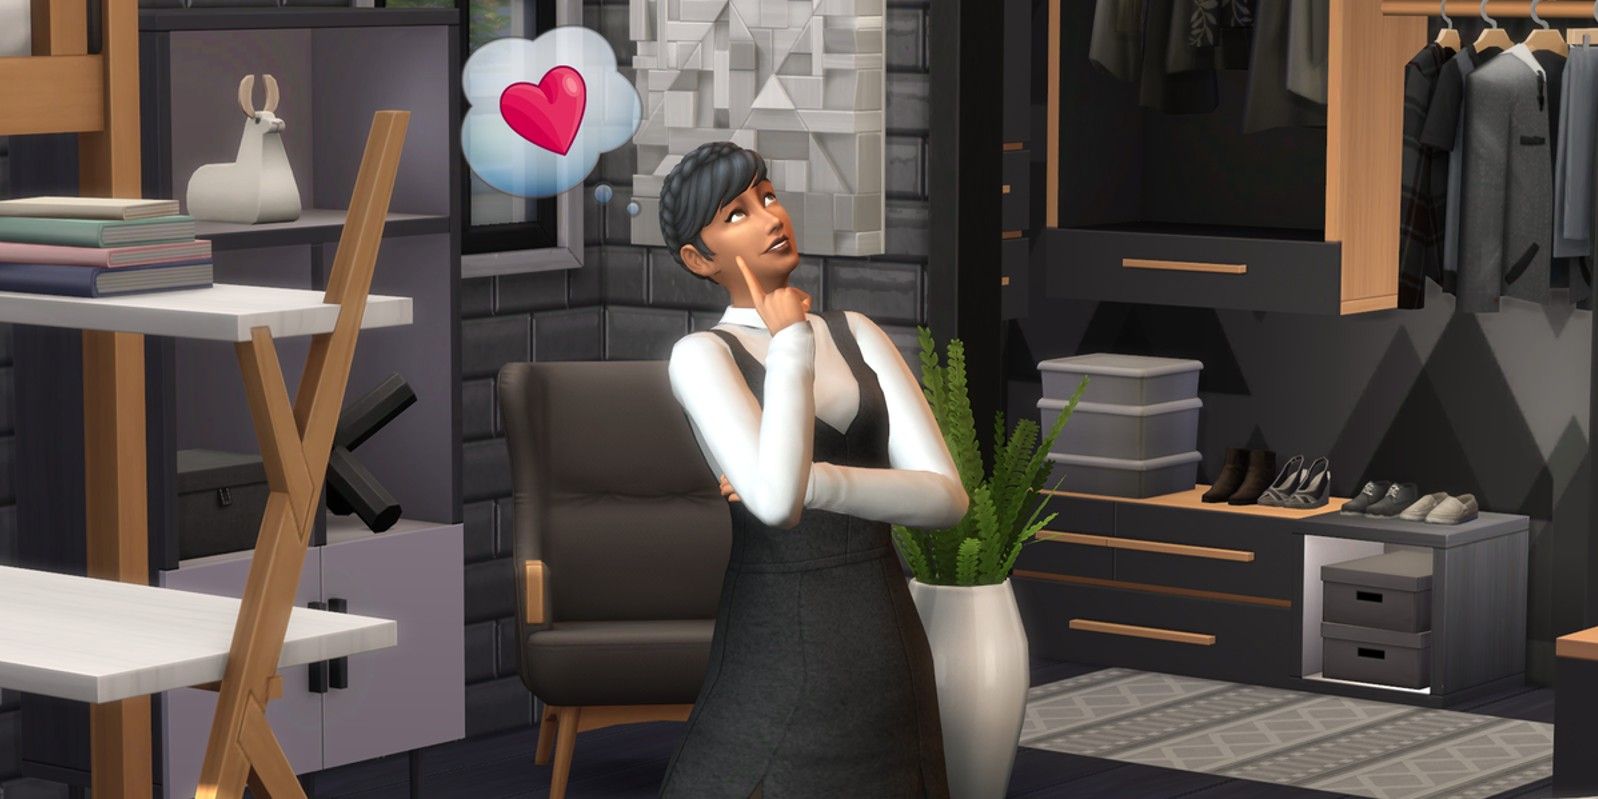 Sims 4 Sim thinking with a thought bubble over their head with a heart in it.